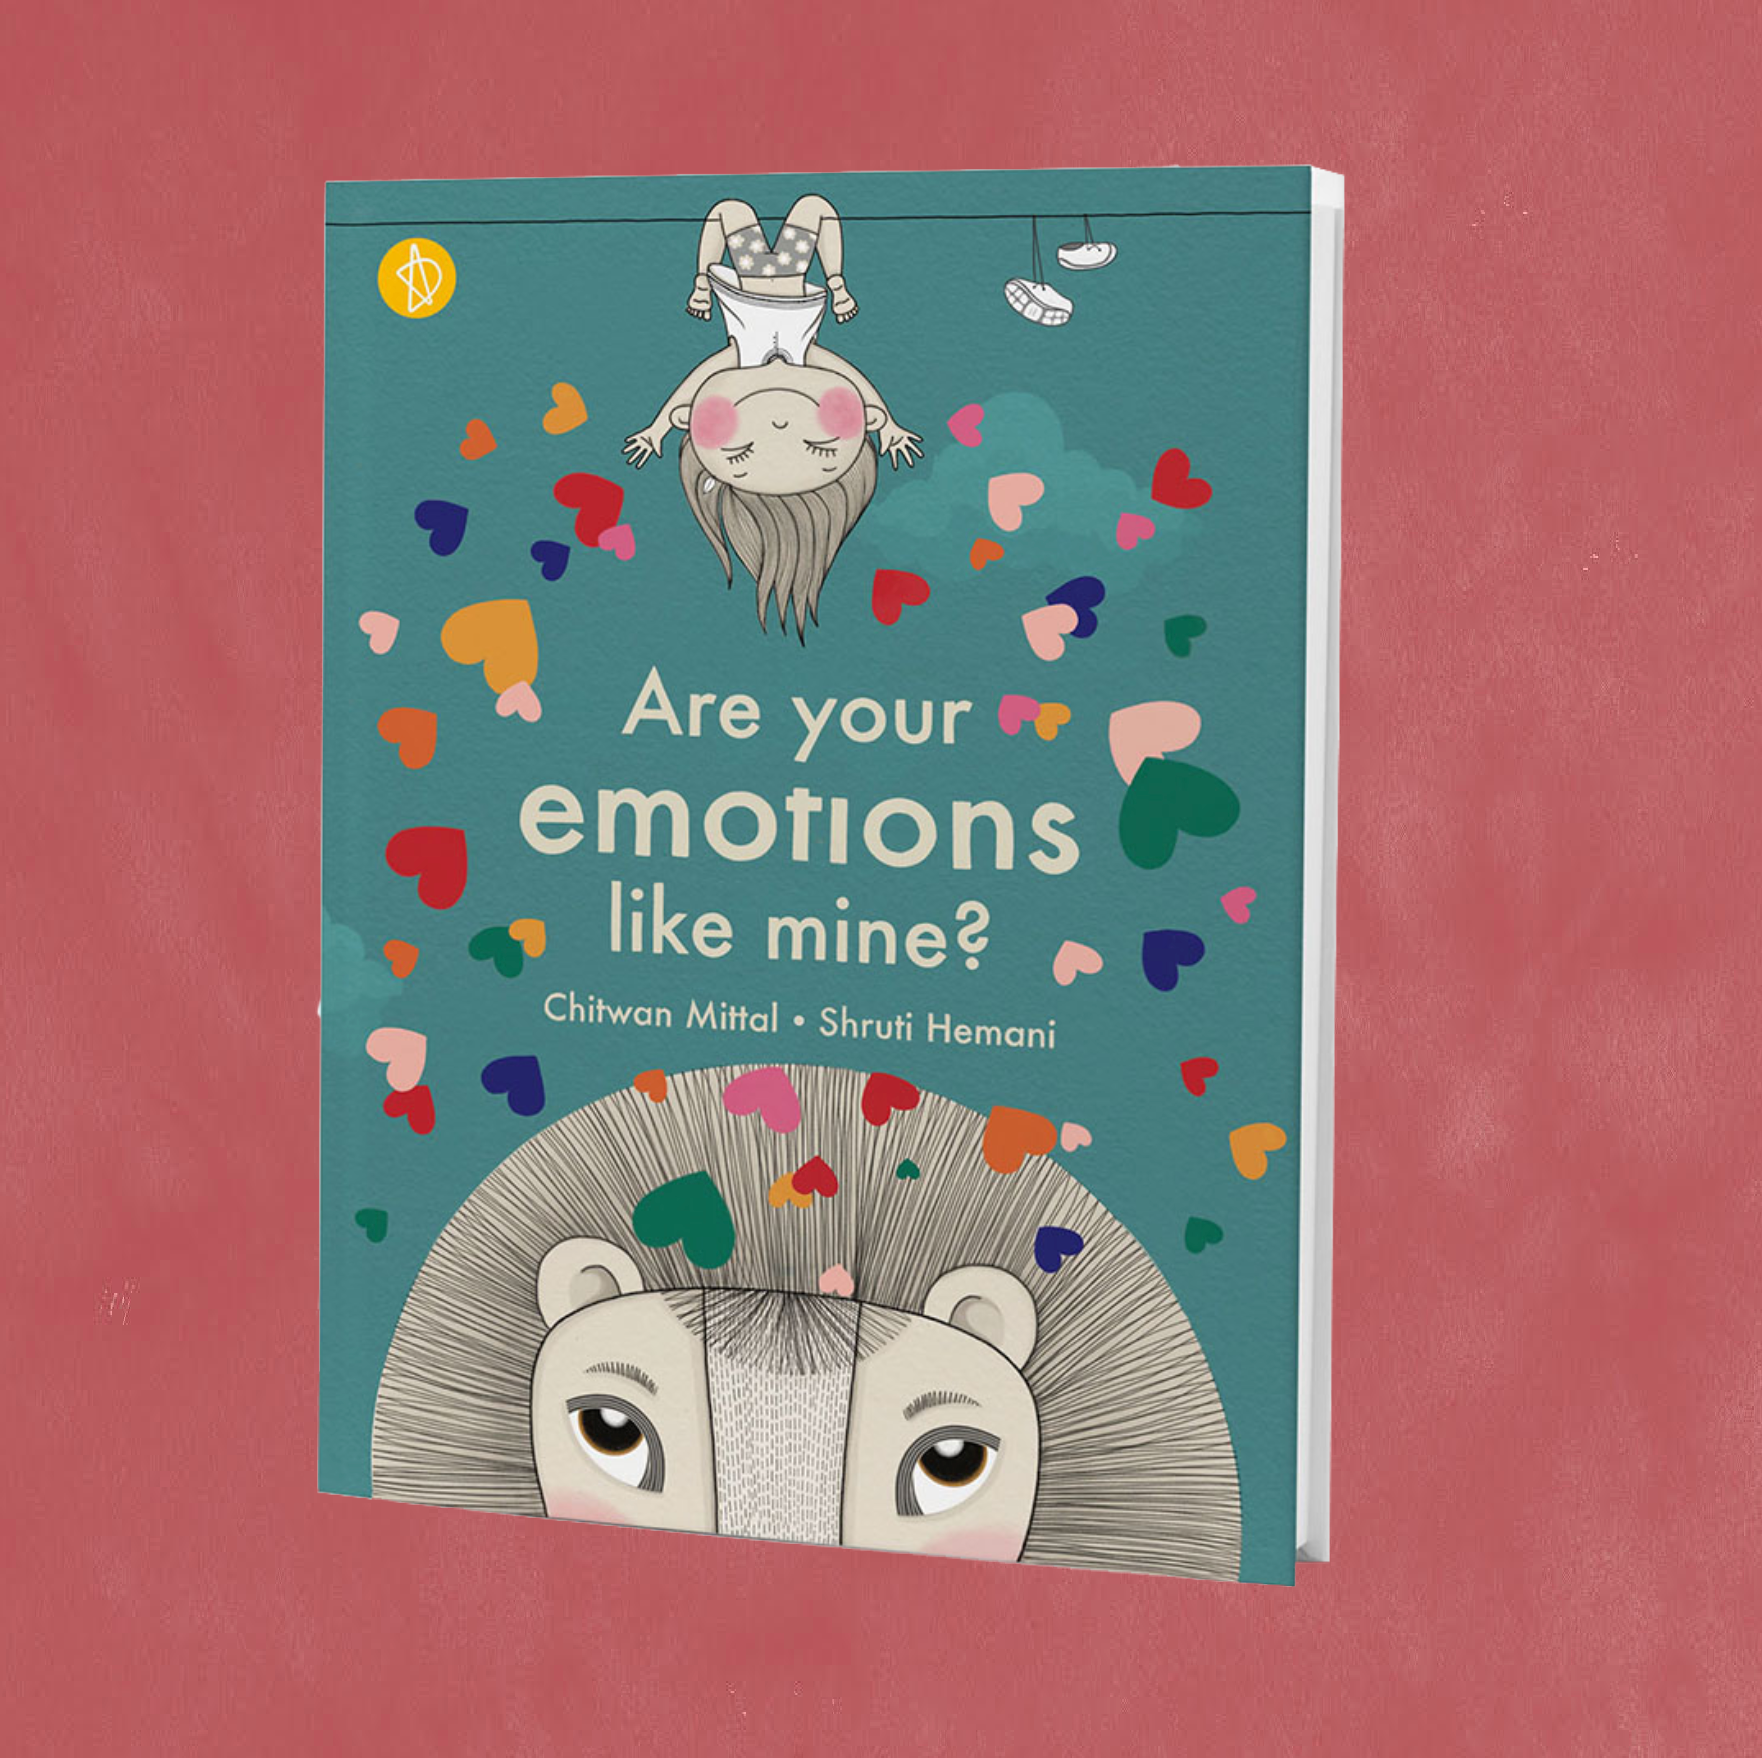 Learn how to name and understand emotions with a little girl and her lion friend! Whimsical illustrations, simple text and universal themes make this book perfect to read aloud to toddlers.